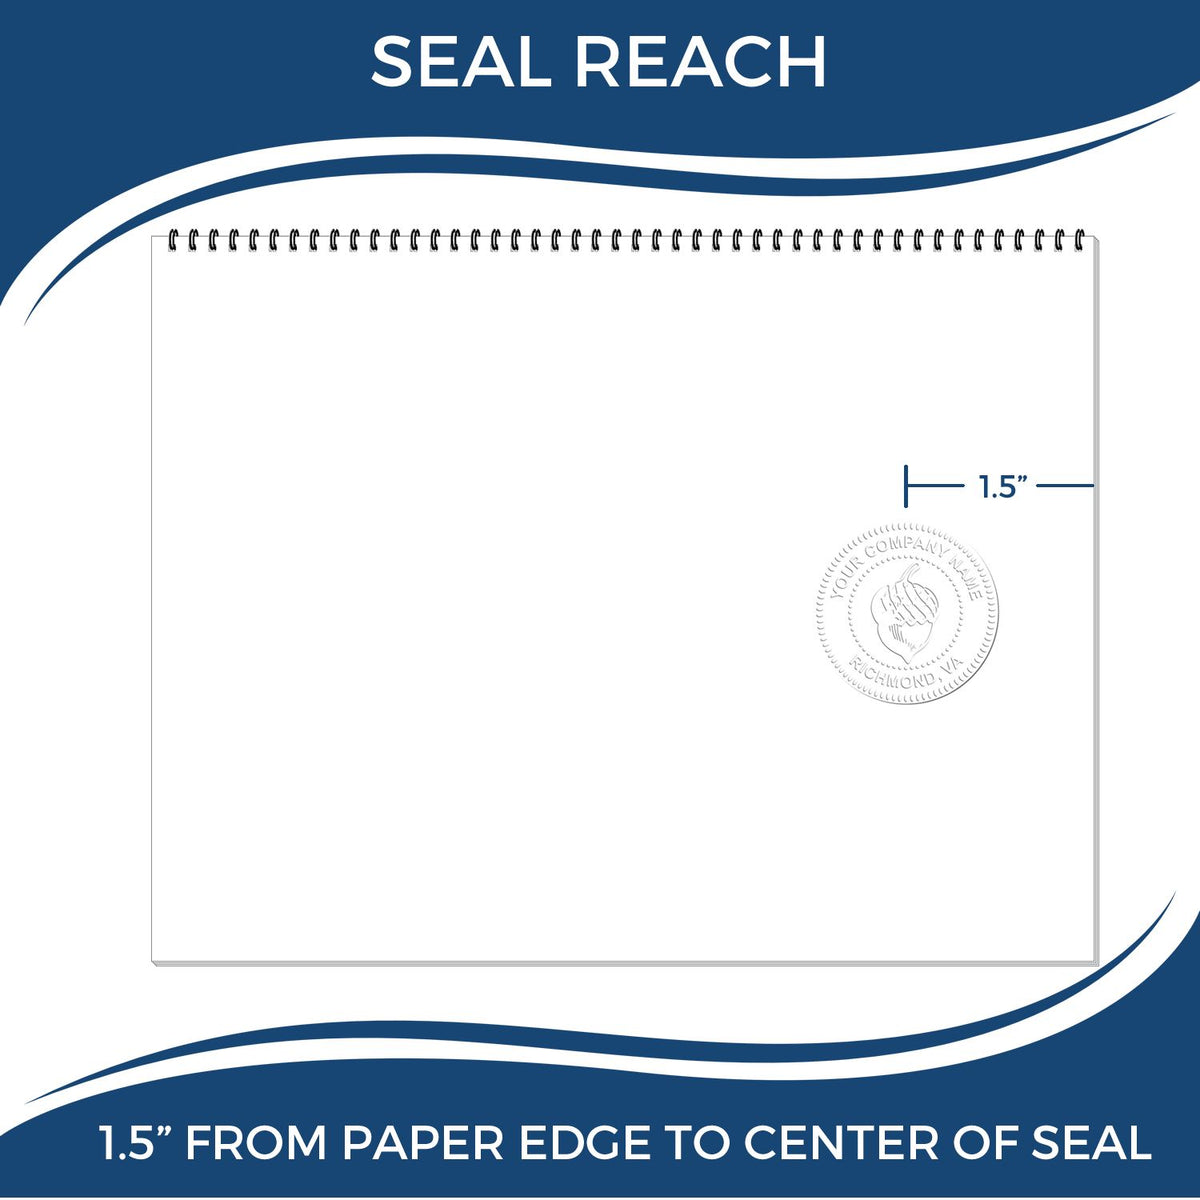 An infographic showing the seal reach which is represented by a ruler and a miniature seal image of the Handheld Florida Land Surveyor Seal